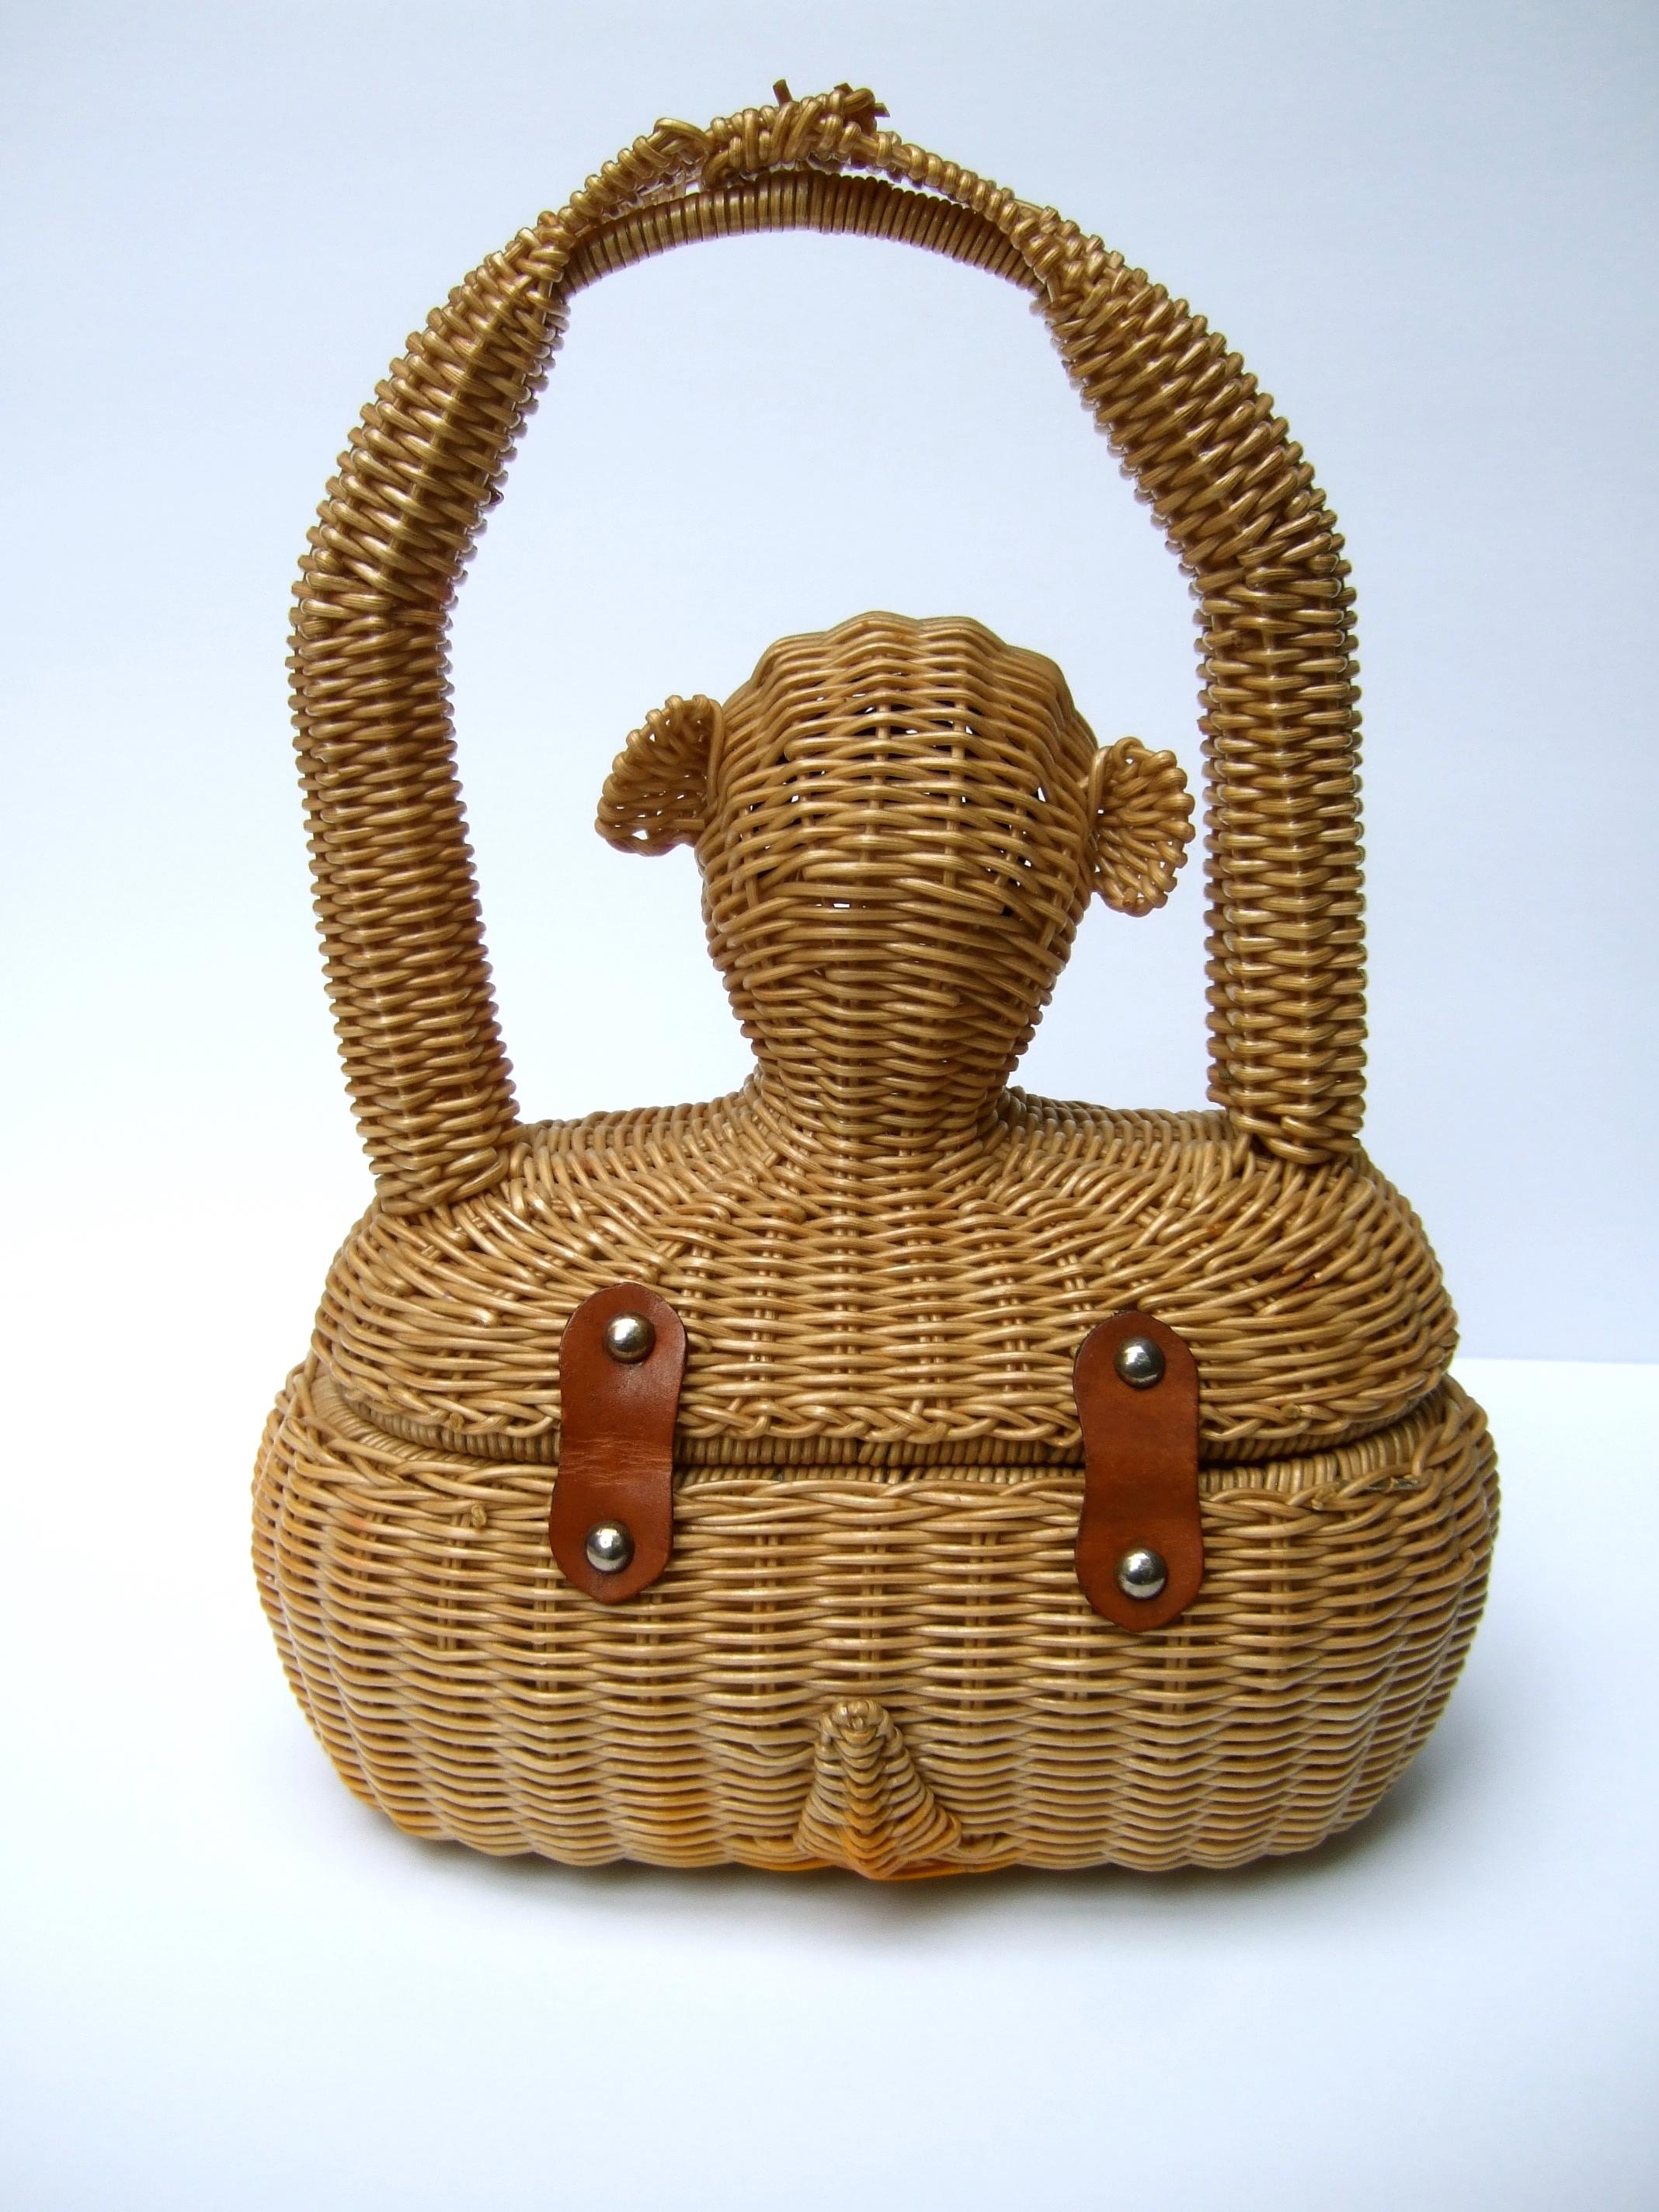 Whimsical Very Rare Wicker Monkey Handbag Designed by Marcus Brothers c 1960 For Sale 14